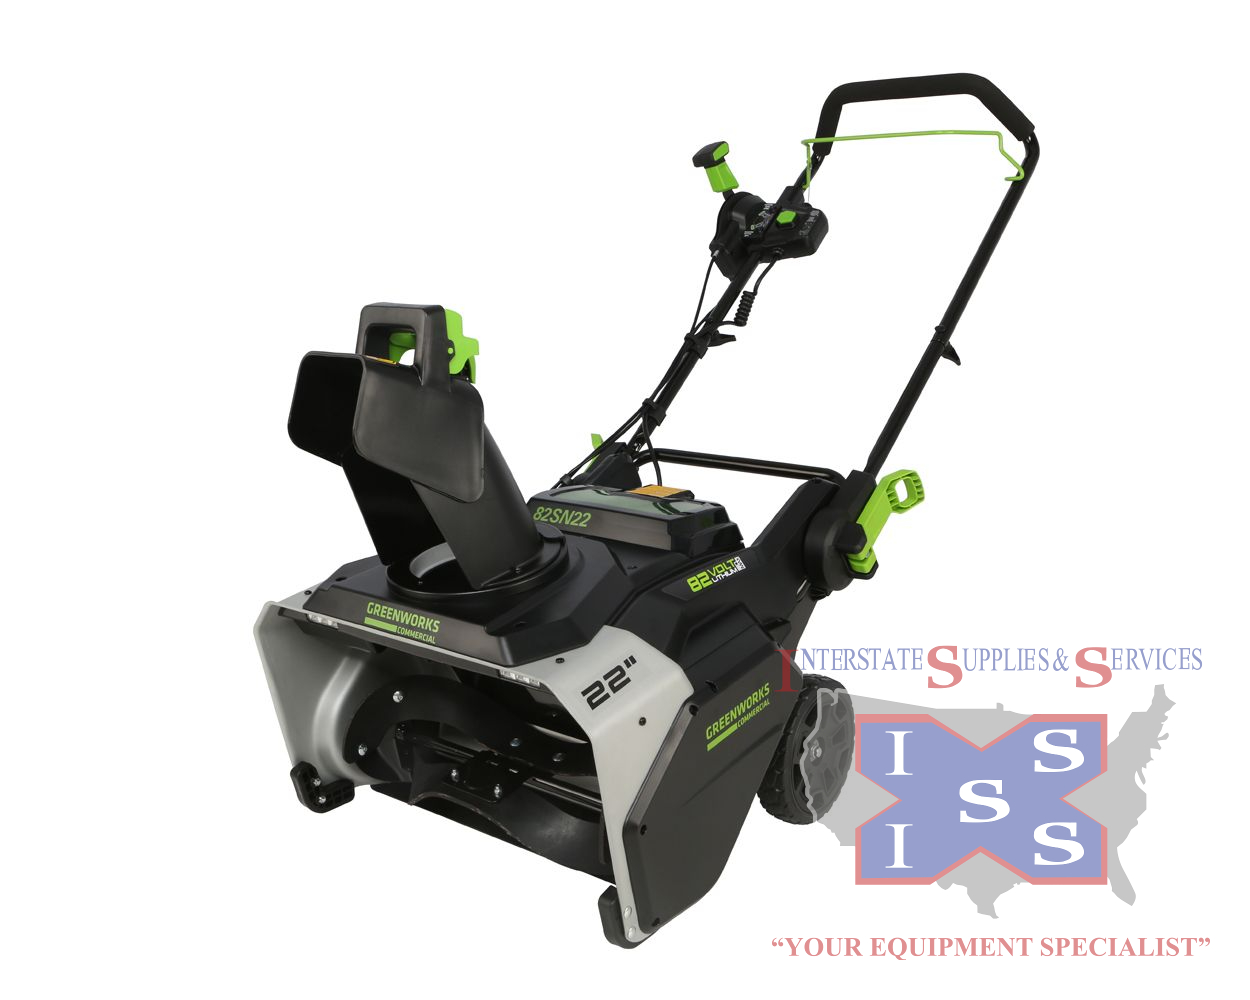 82SN22 Brushless 22" Dual Port Snow Thrower (Tool Only)